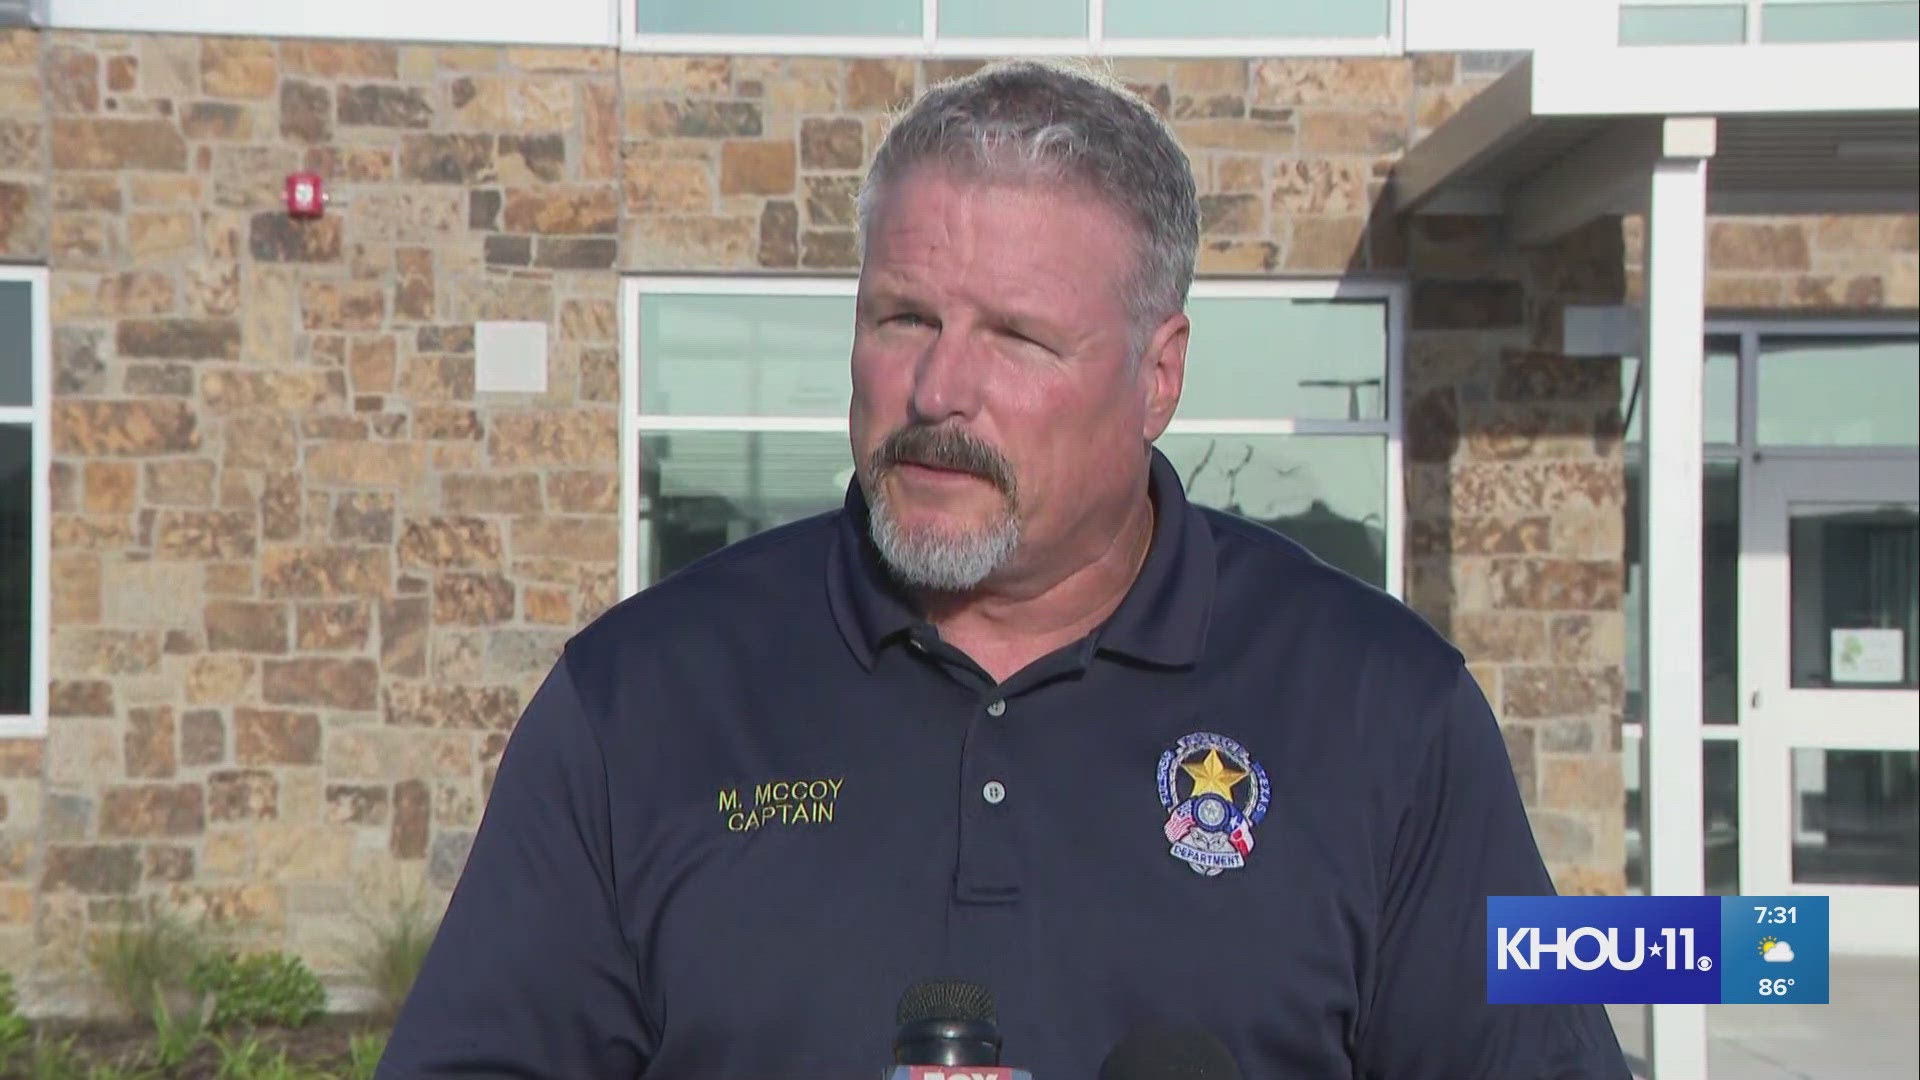 Fulshear Police Capt. Mike McCoy spoke with the media Thursday morning after a 12-year-old girl was found dead in a lake.